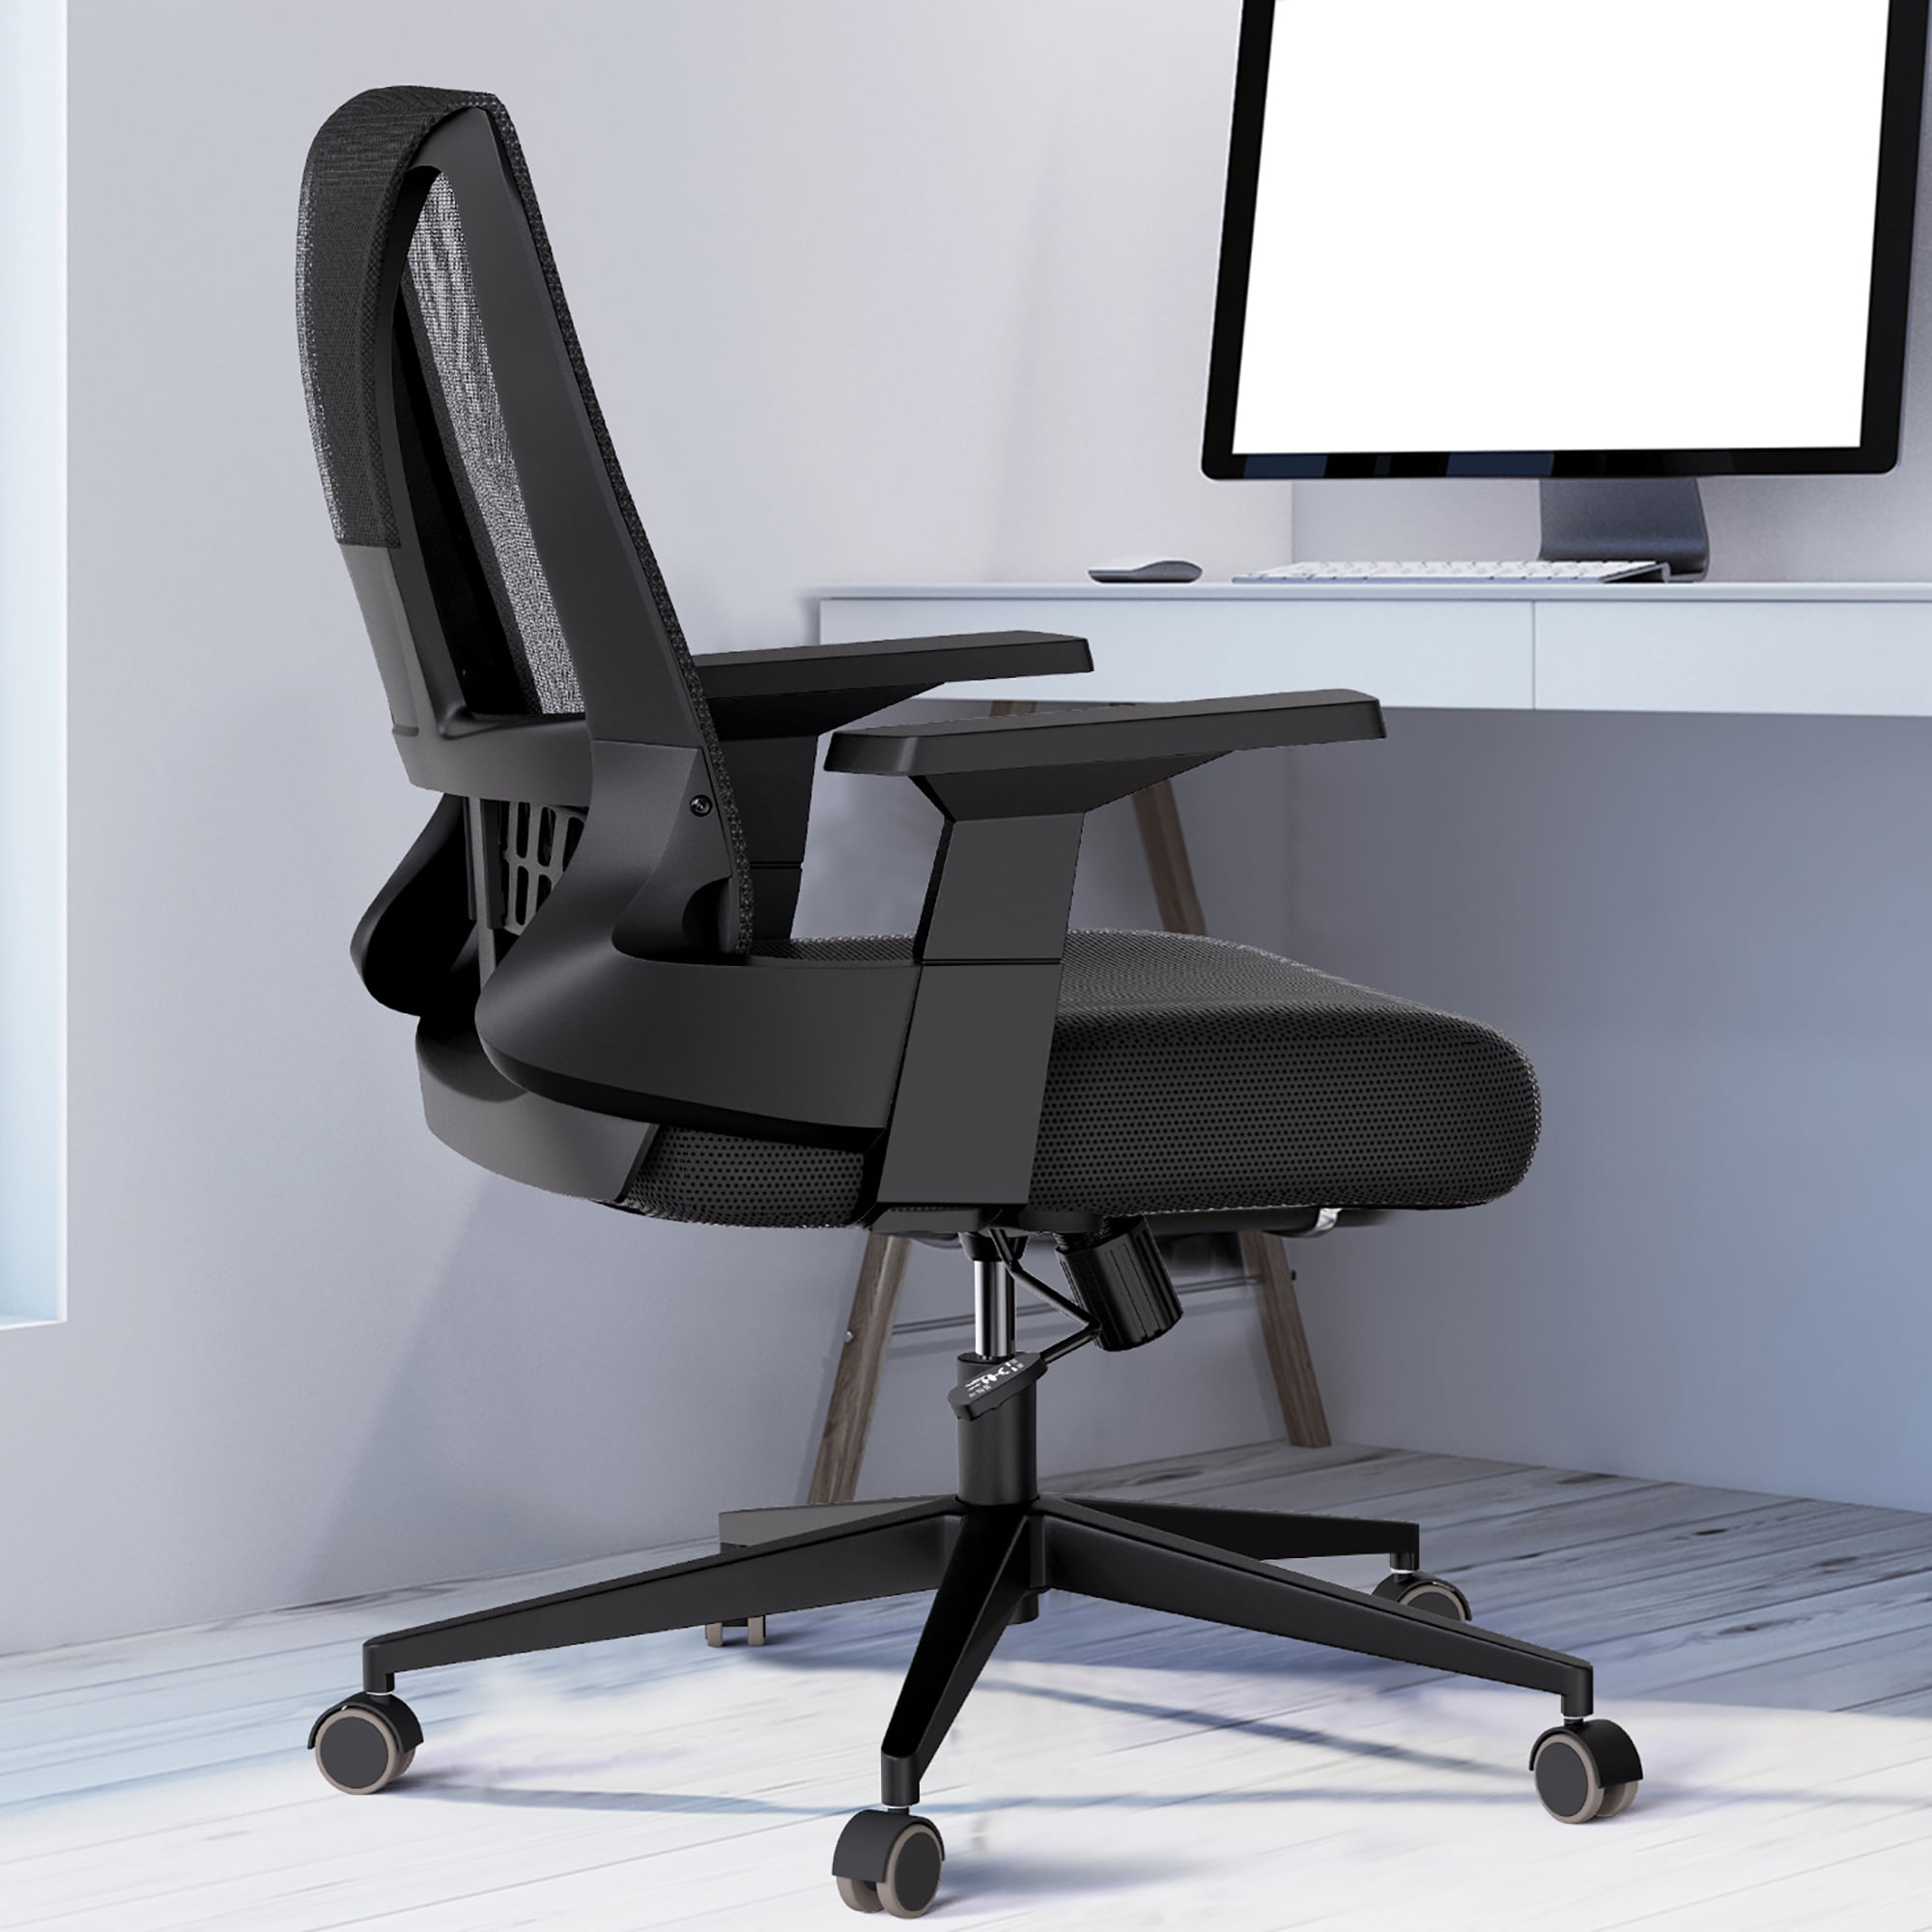 Computer Desk Chairs High Back with Lumbar Support DAVEJONES Ergonomic Office Chair 3D Adjustable Arms